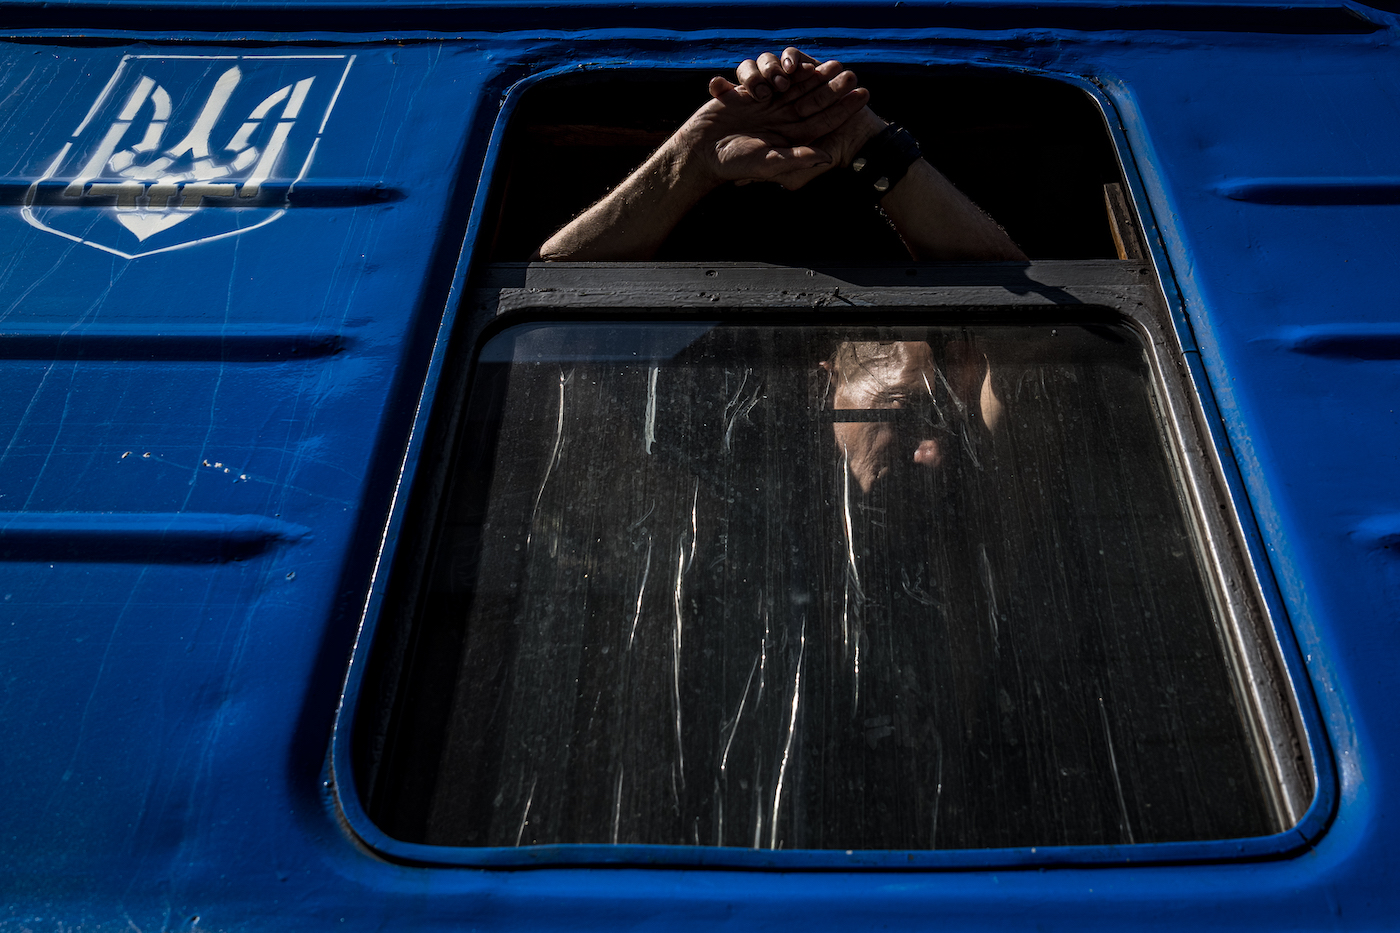 A man is seen leaning against an open window on board a west bound train leaving from Pokrovsk, Ukraine on August 5, 2022 Wolfgang Schwan - Anadolu Agency

As the fighting continued in Donbas and following the fall of Seiverdonetsk, civilians in the area were ordered by the administration to evacuate the region.